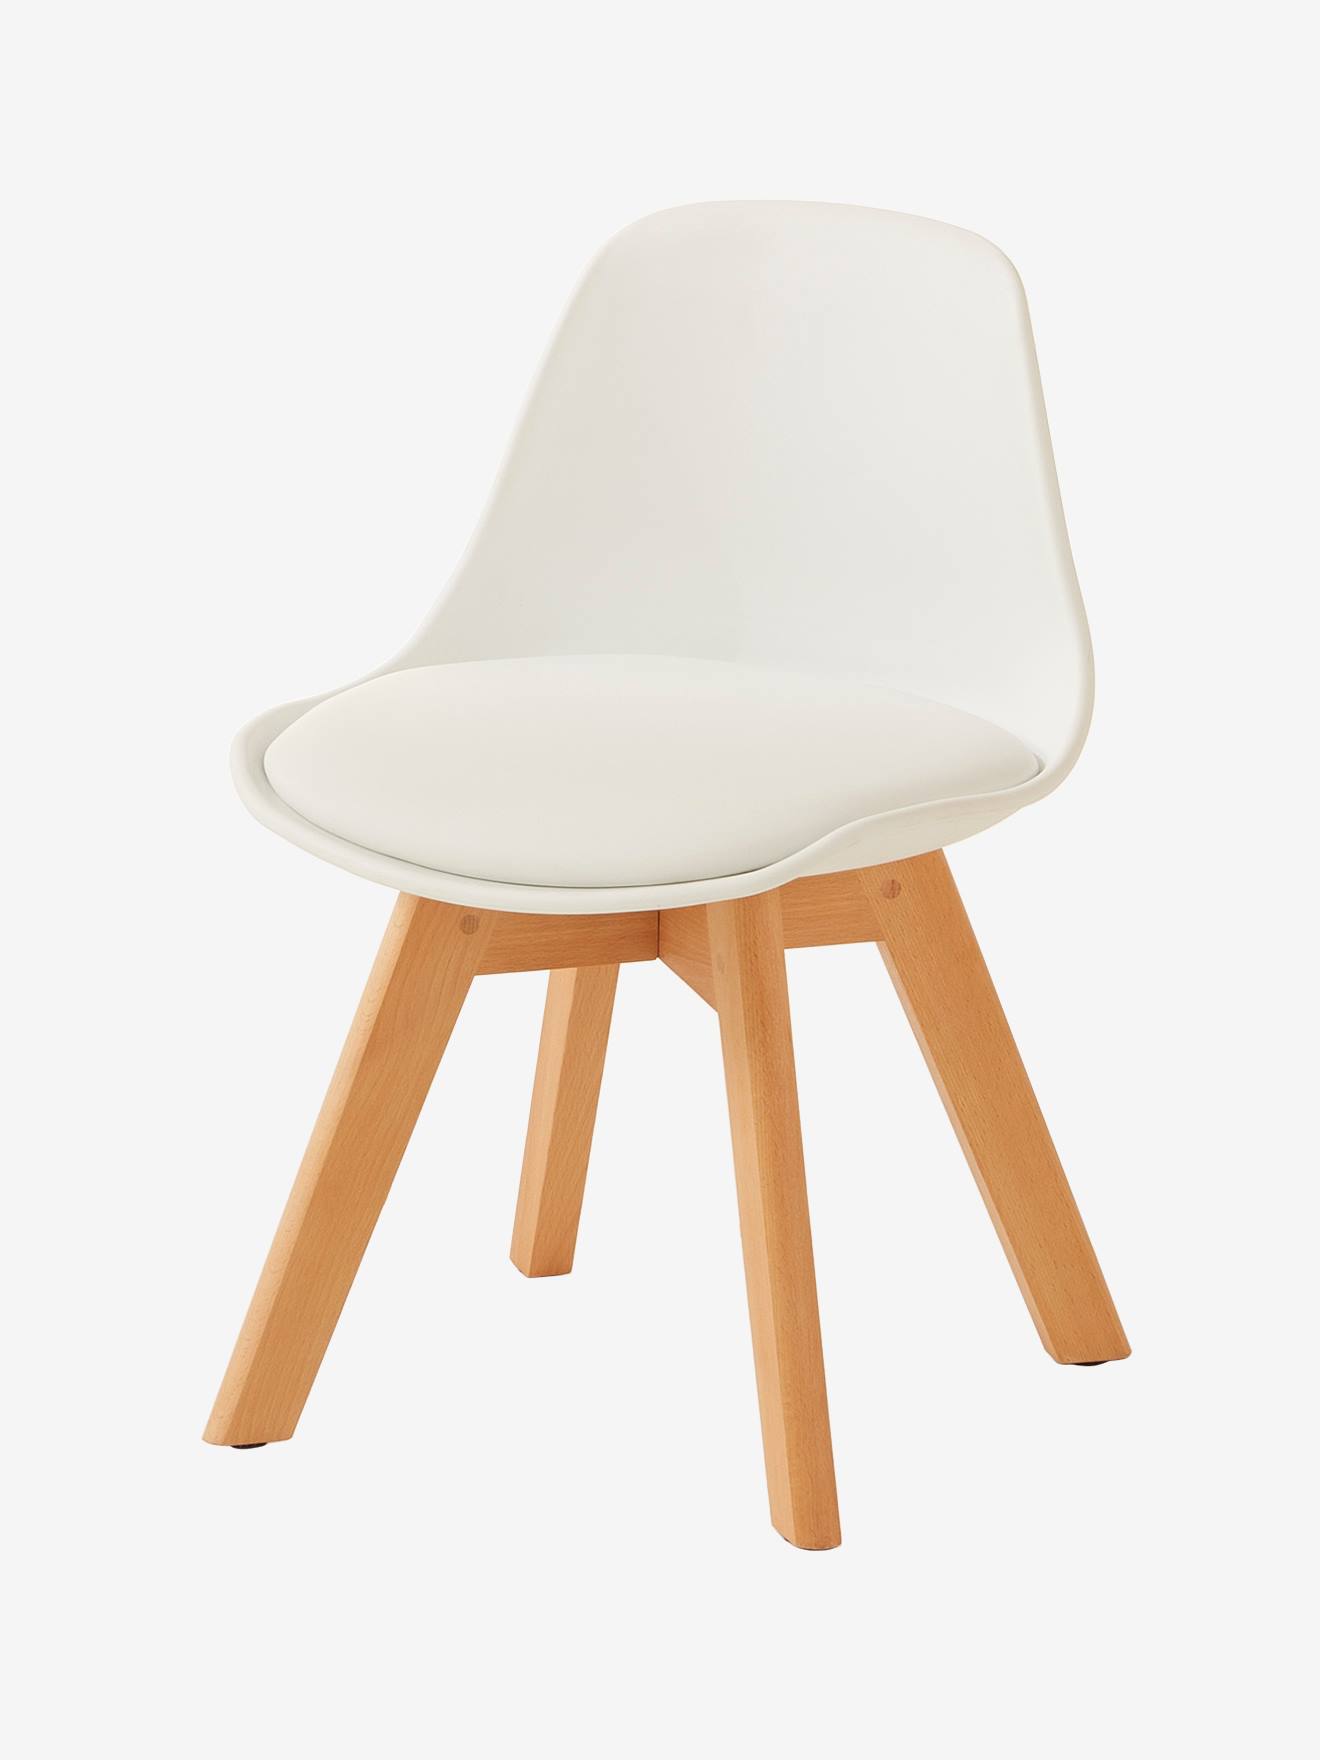 Chaise maternelle Scandinave, assise H 31,5 cm blanc